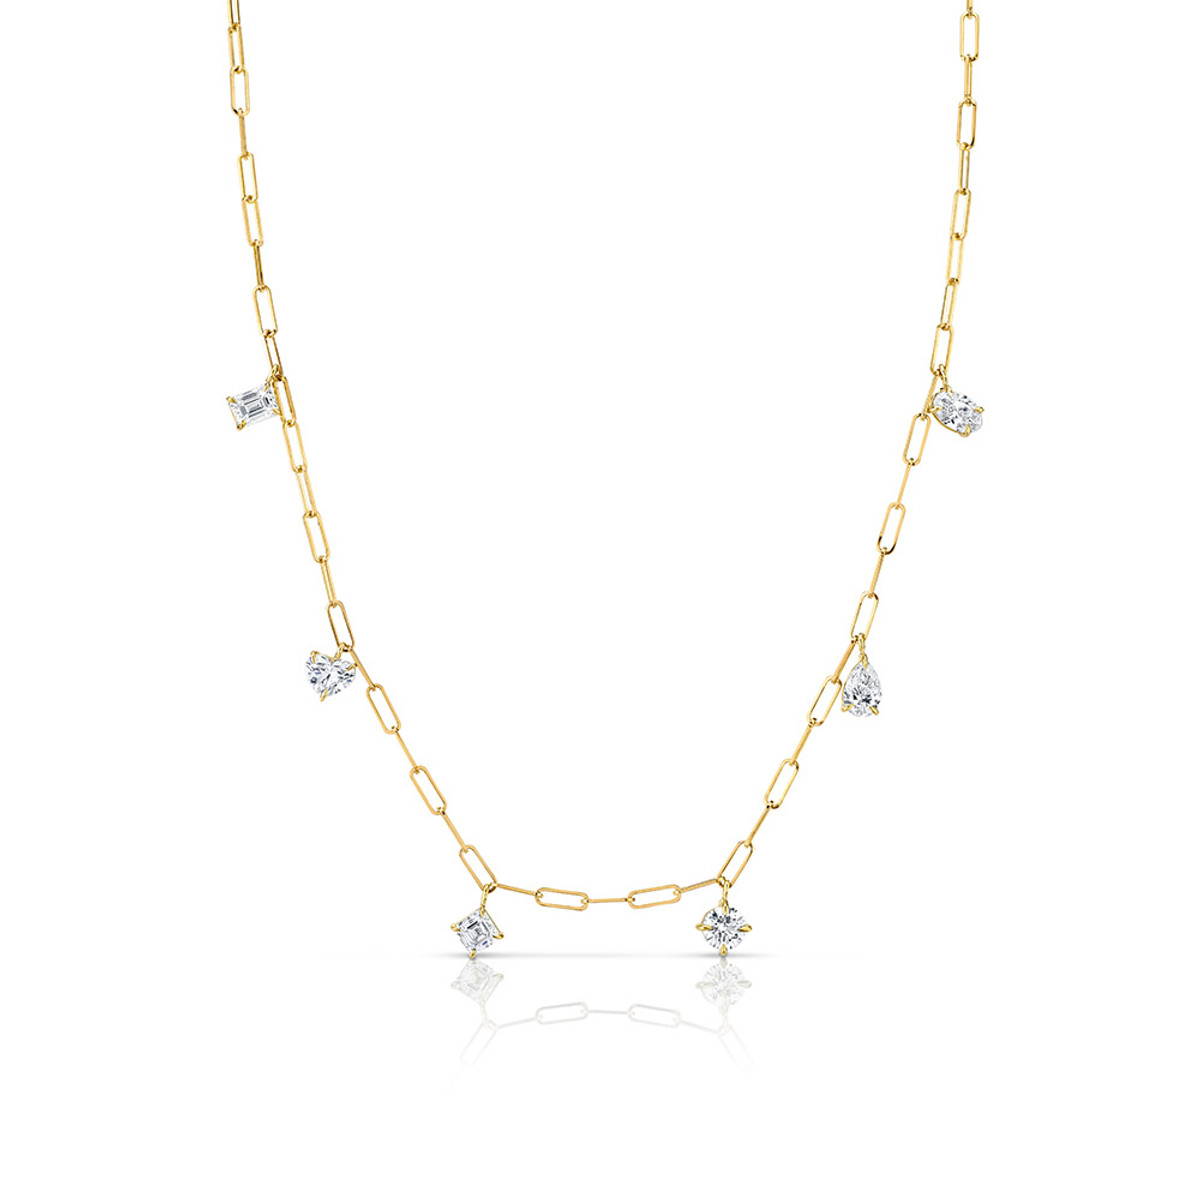 Hyde Park Collection 18K Yellow Gold Diamond Charm Necklace-44006